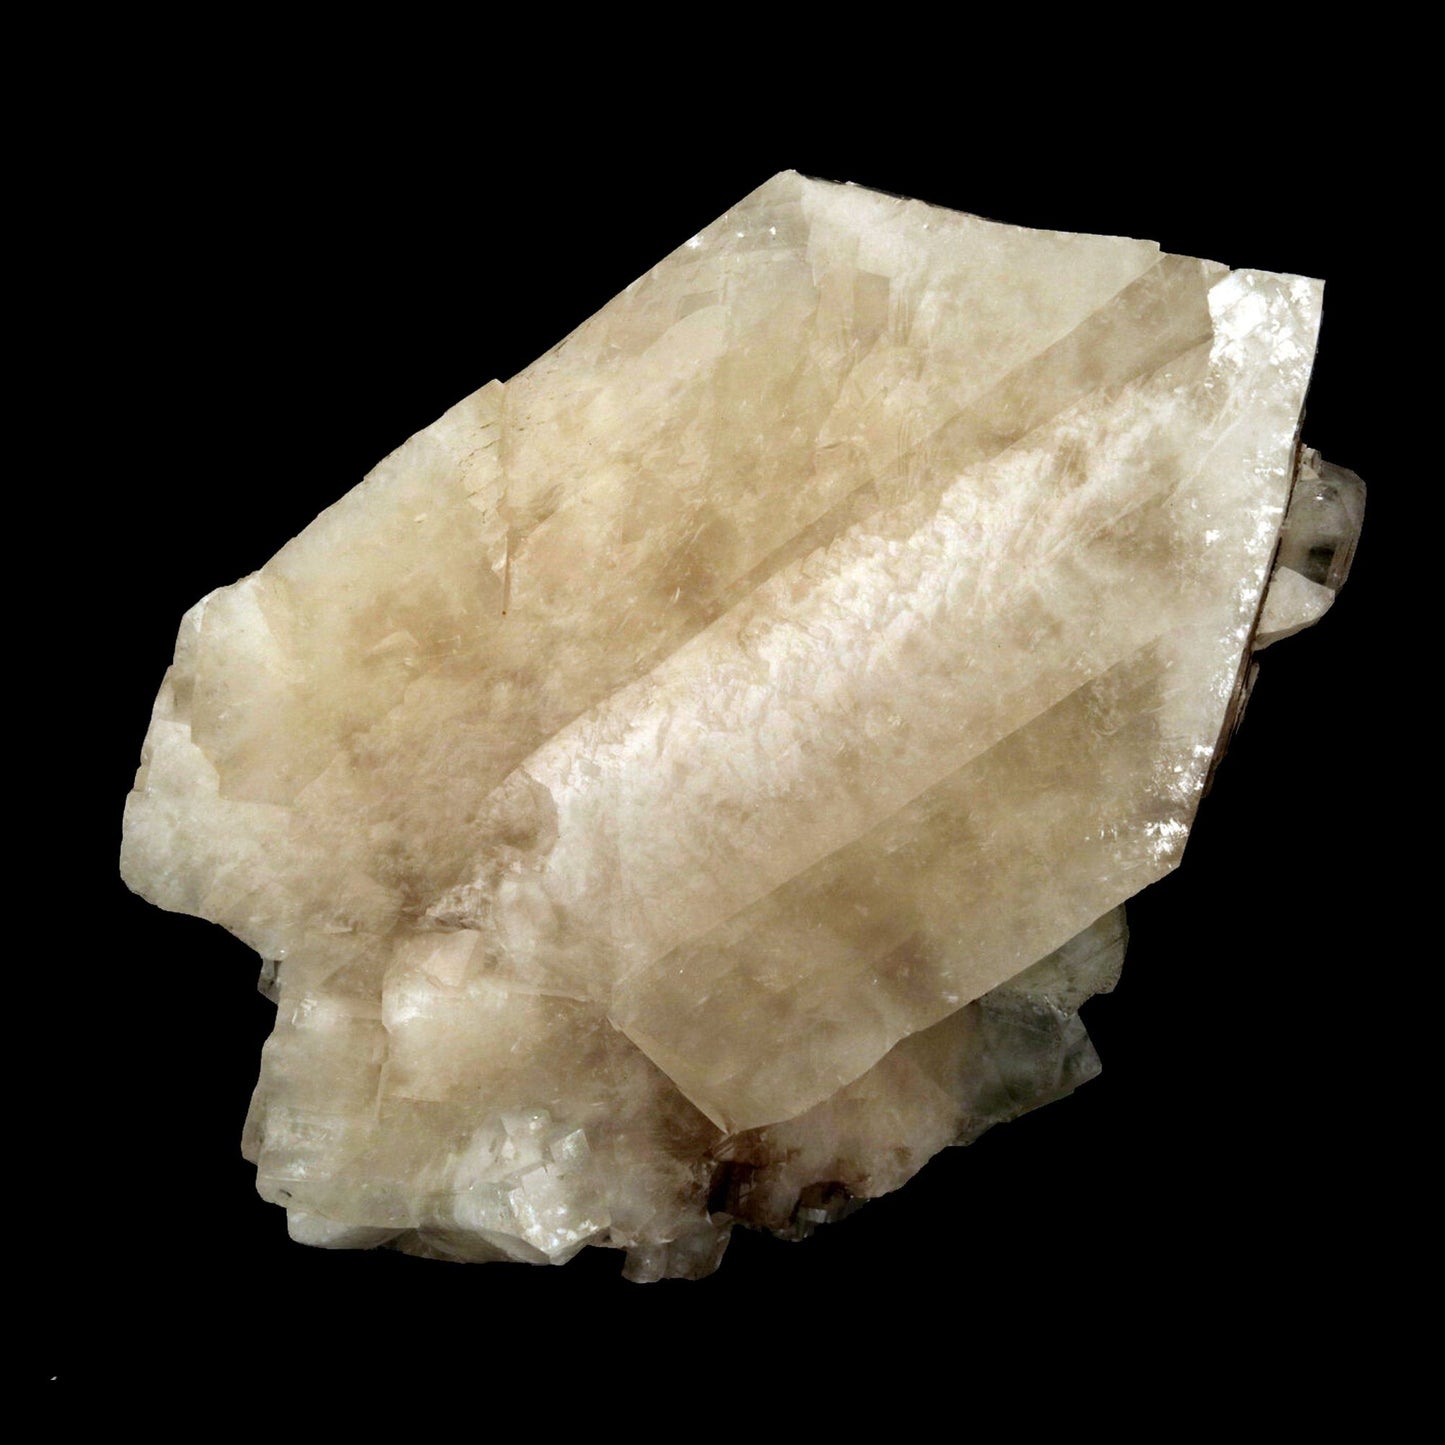 Calcite Crystal Natural Mineral Specimen # B 2486 Pointed Triangular shape calcite crystal. Primary Mineral(s): CalciteSecondary Mineral(s): N/AMatrix: N/A14 cm x 10 cm950 GmsLocality: Nashik, Maharashtra, IndiaYear of Discovery: 2017